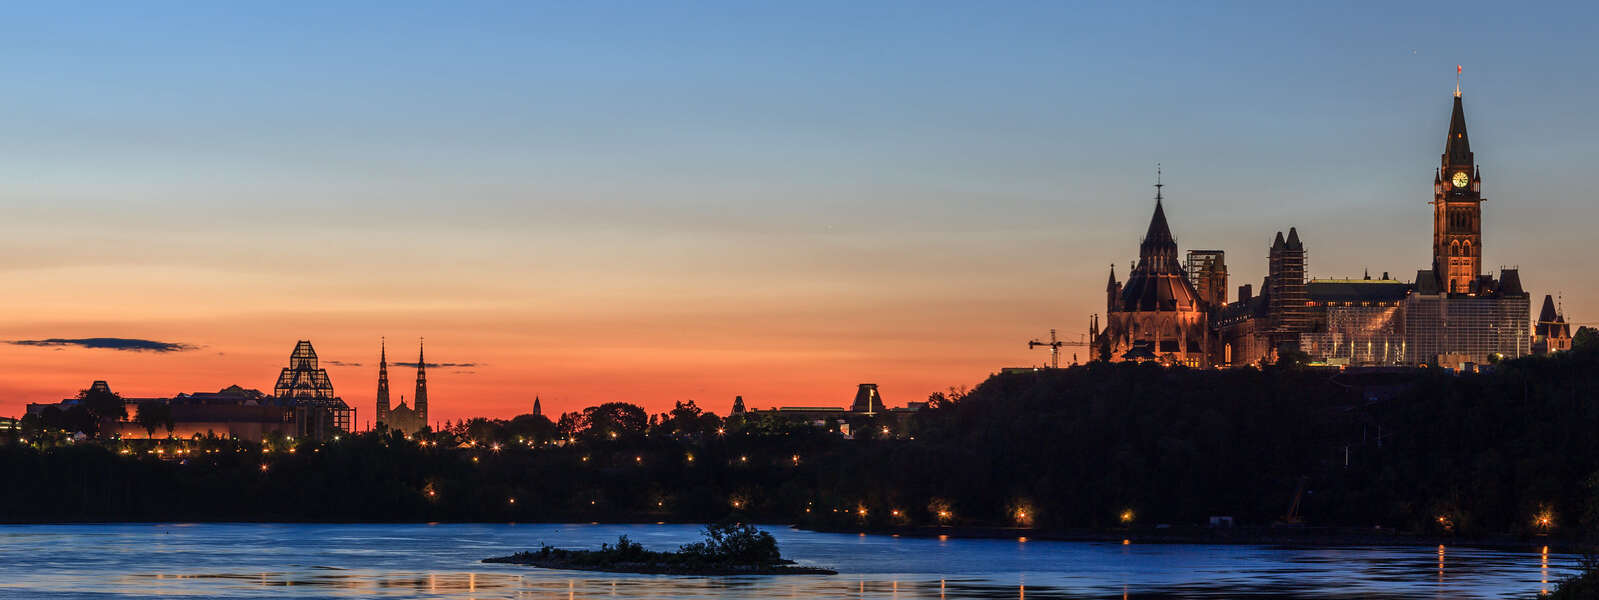 Parliament Hill and the Ottawa skyline are silhouetted at sunrise behind the Rideau River